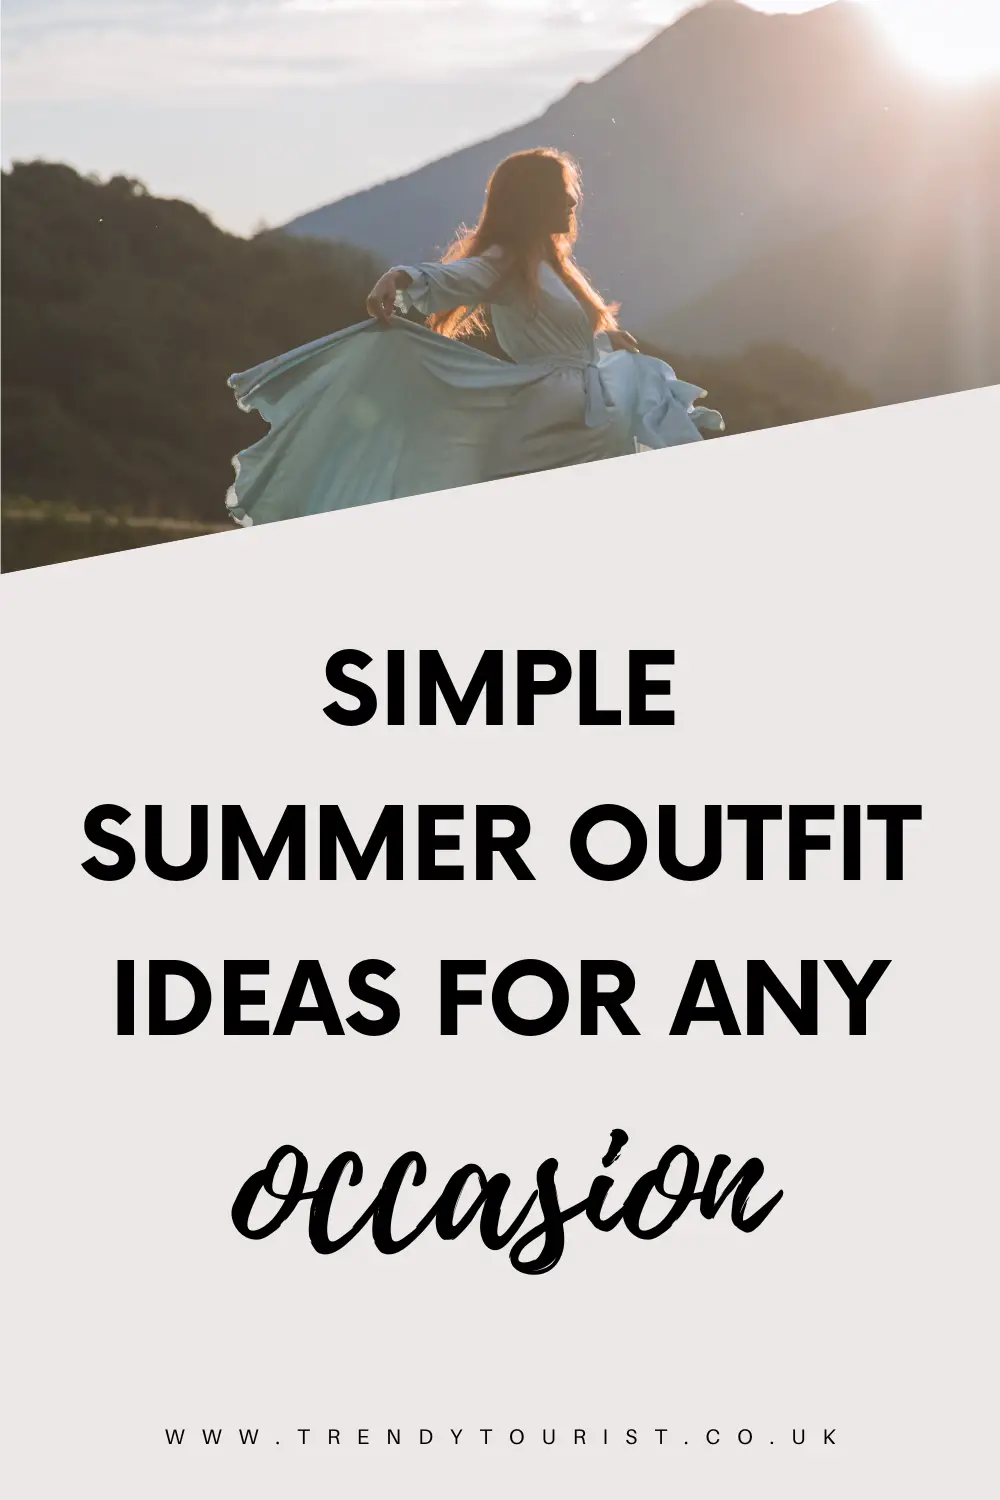 Simple Summer Outfit Ideas for Any Occasion